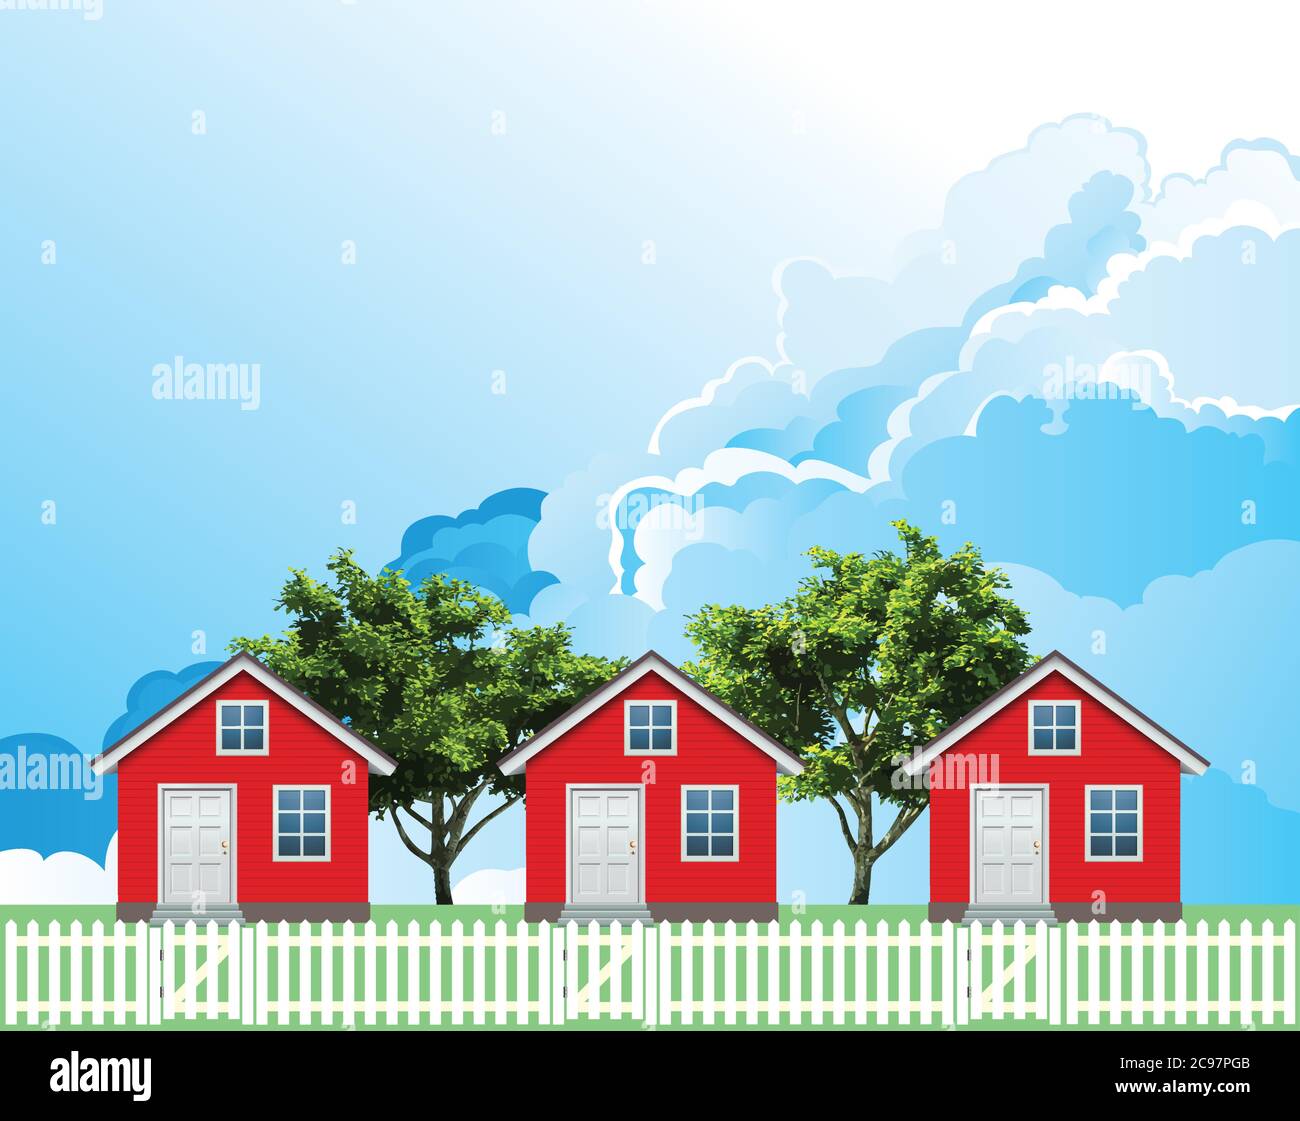 Row of detached residential houses on a suburb street with white picket fence and gate set against a blue cloudy sky Stock Vector